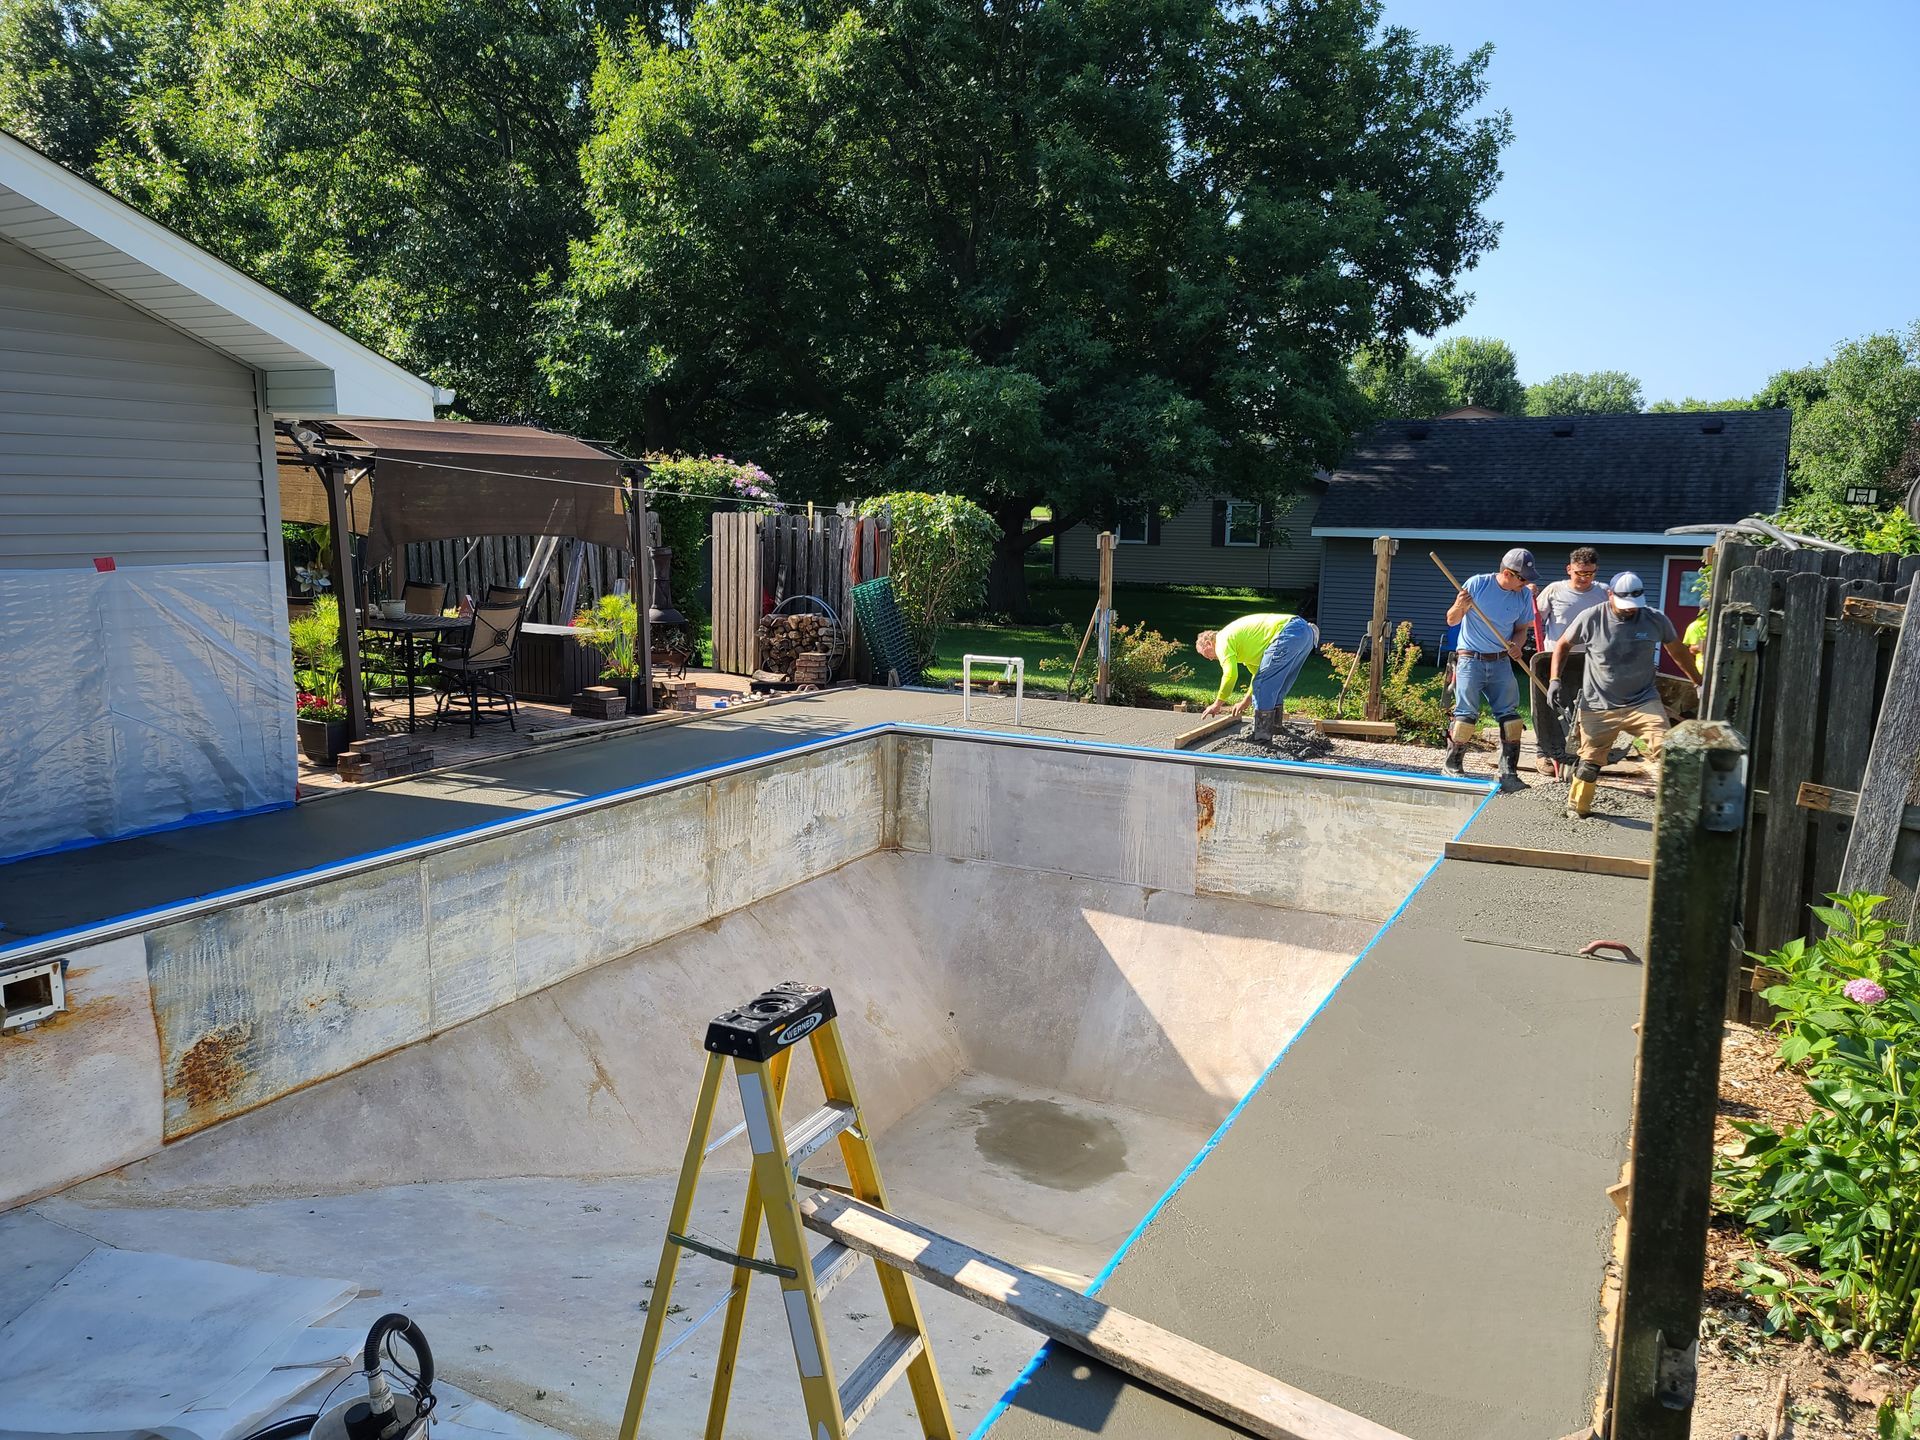 a group of people are working on a swimming pool in a backyard .